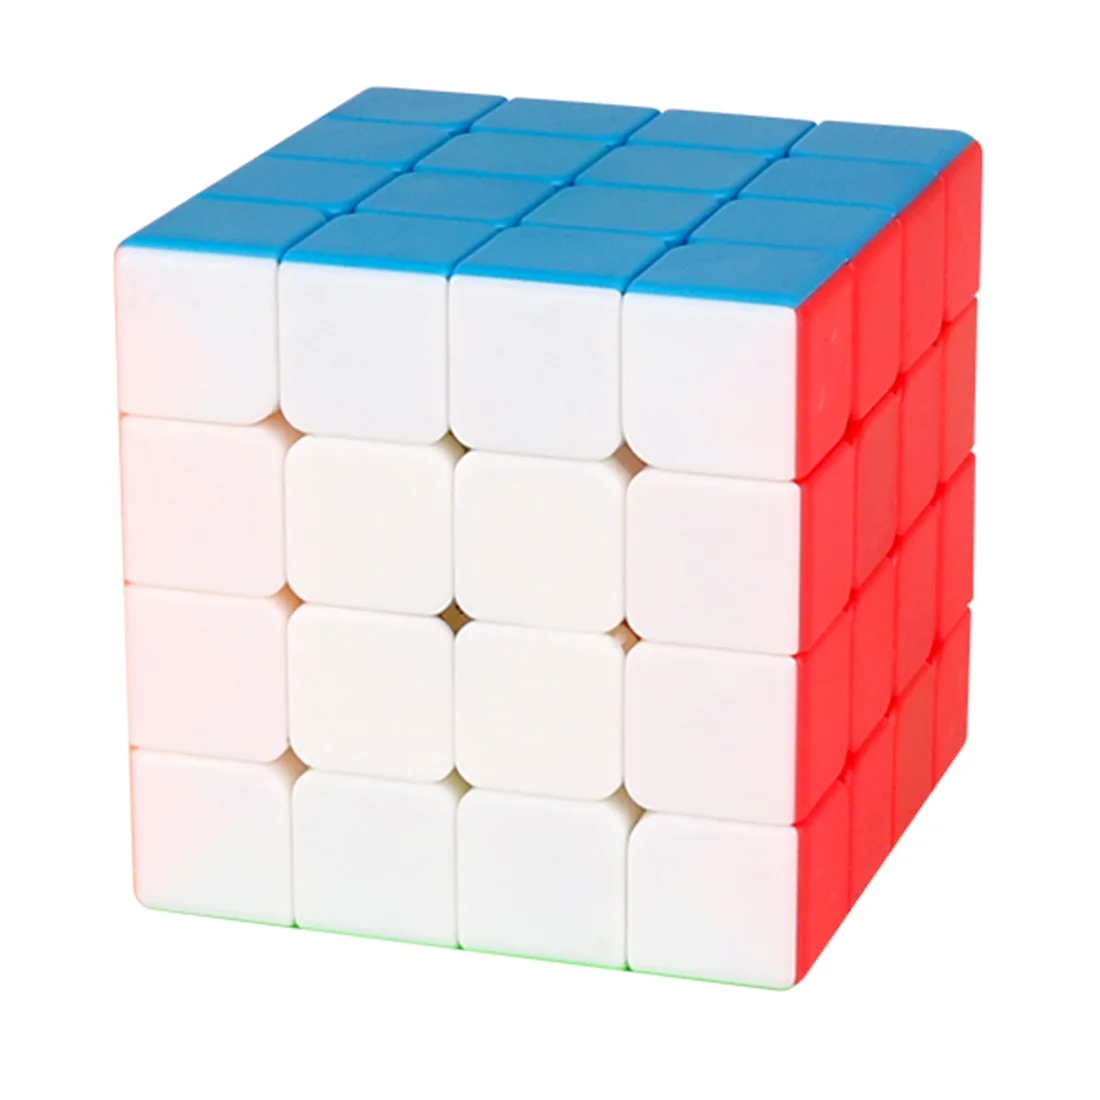 

[ECube] MeiLong 4x4x4 Magic Cube Puzzle Game Puzzle Cubes Kids Early Educational Toy For Children New Cube 2019 - Colorful